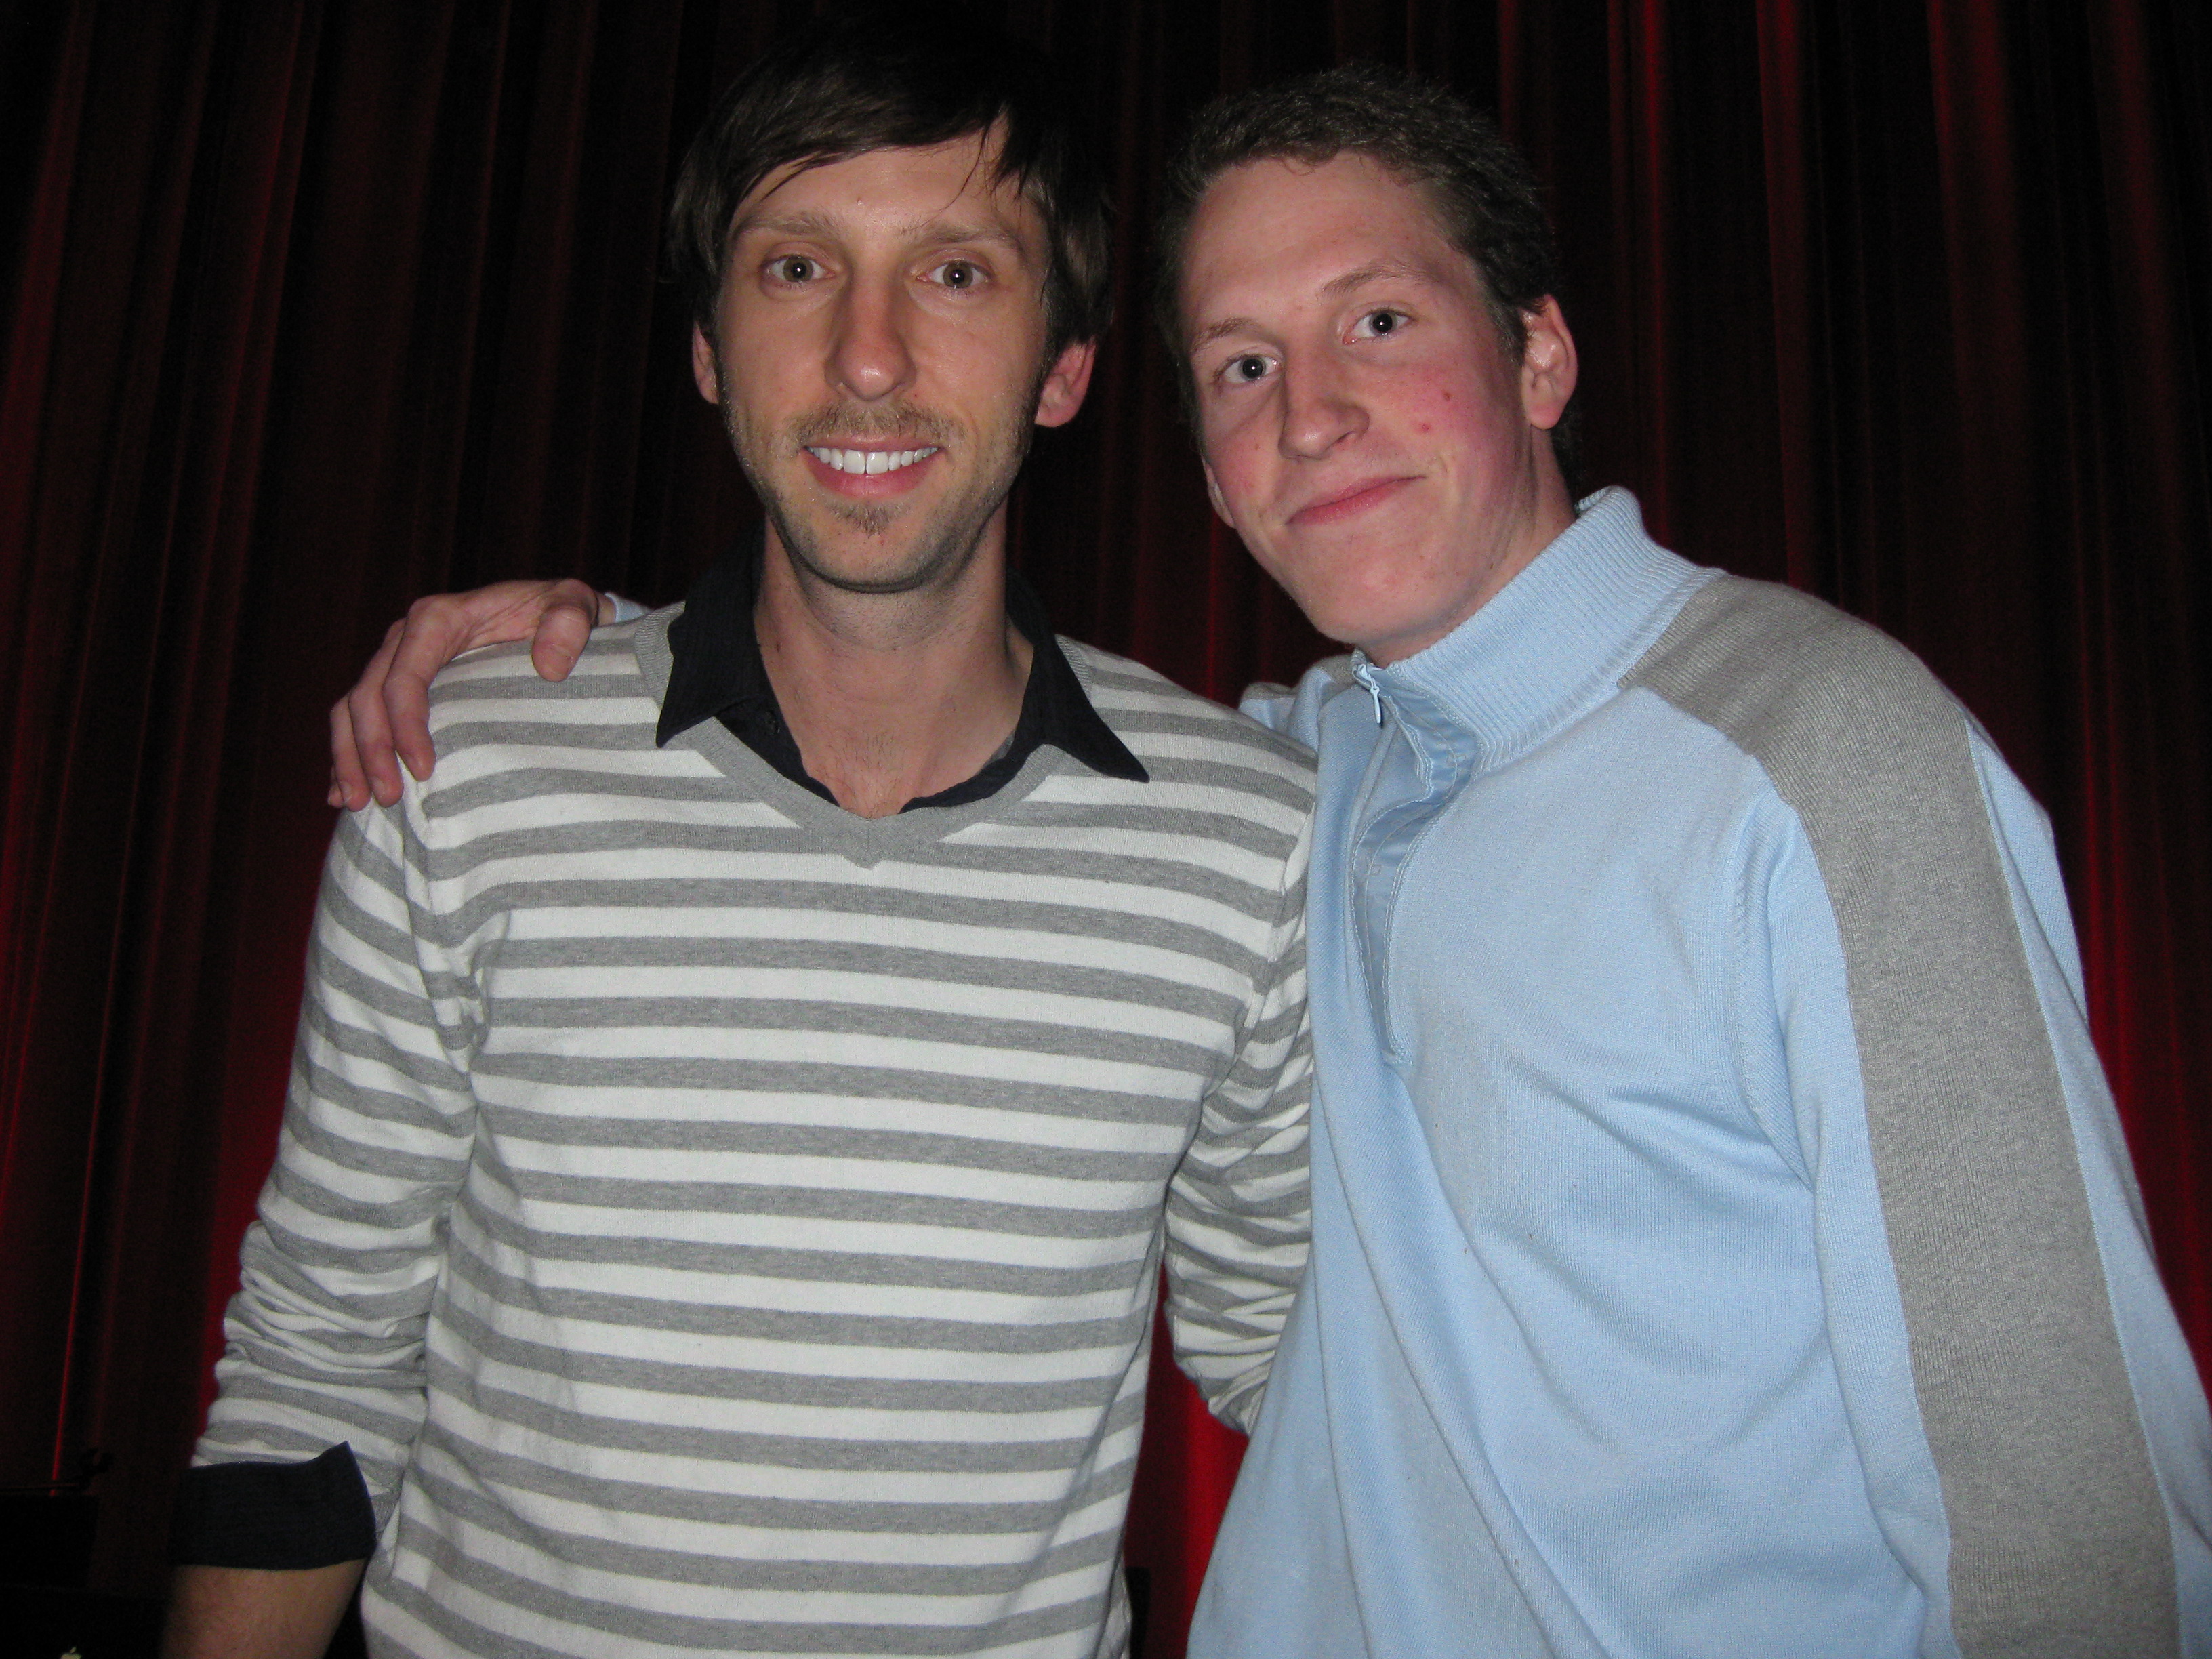 Joel David Moore and David James Goulard at event of A.M.P.A.S. in Beverly Hills